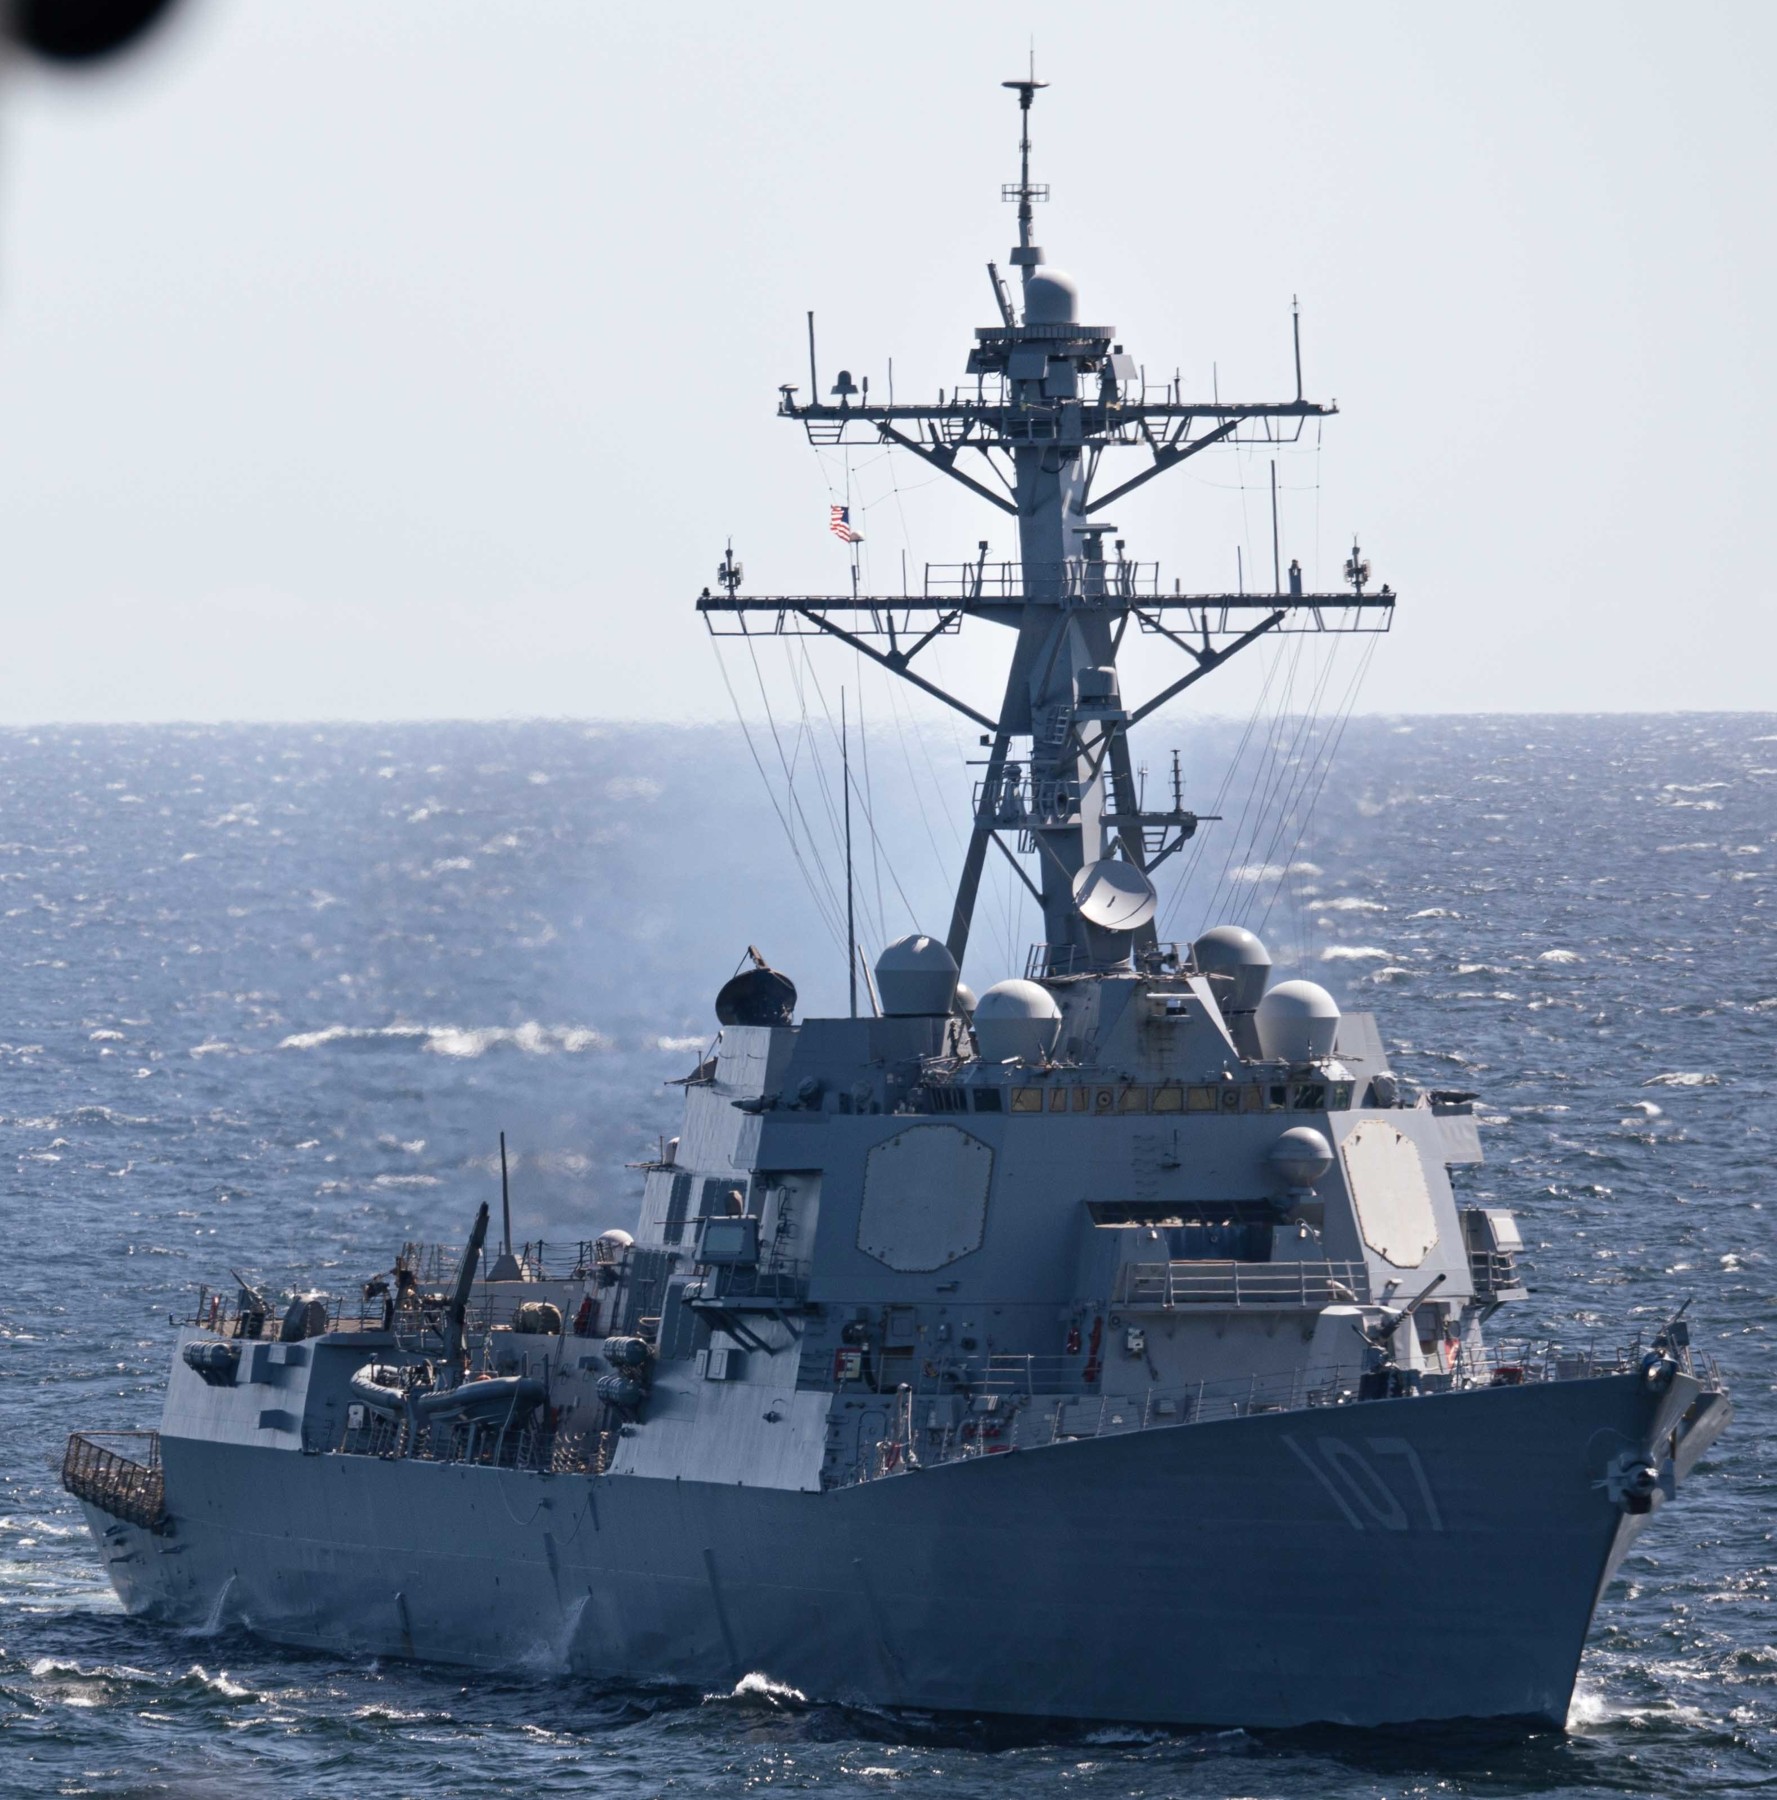 ddg-107 uss gravely arleigh burke class guided missile destroyer aegis us navy baltic sea 59